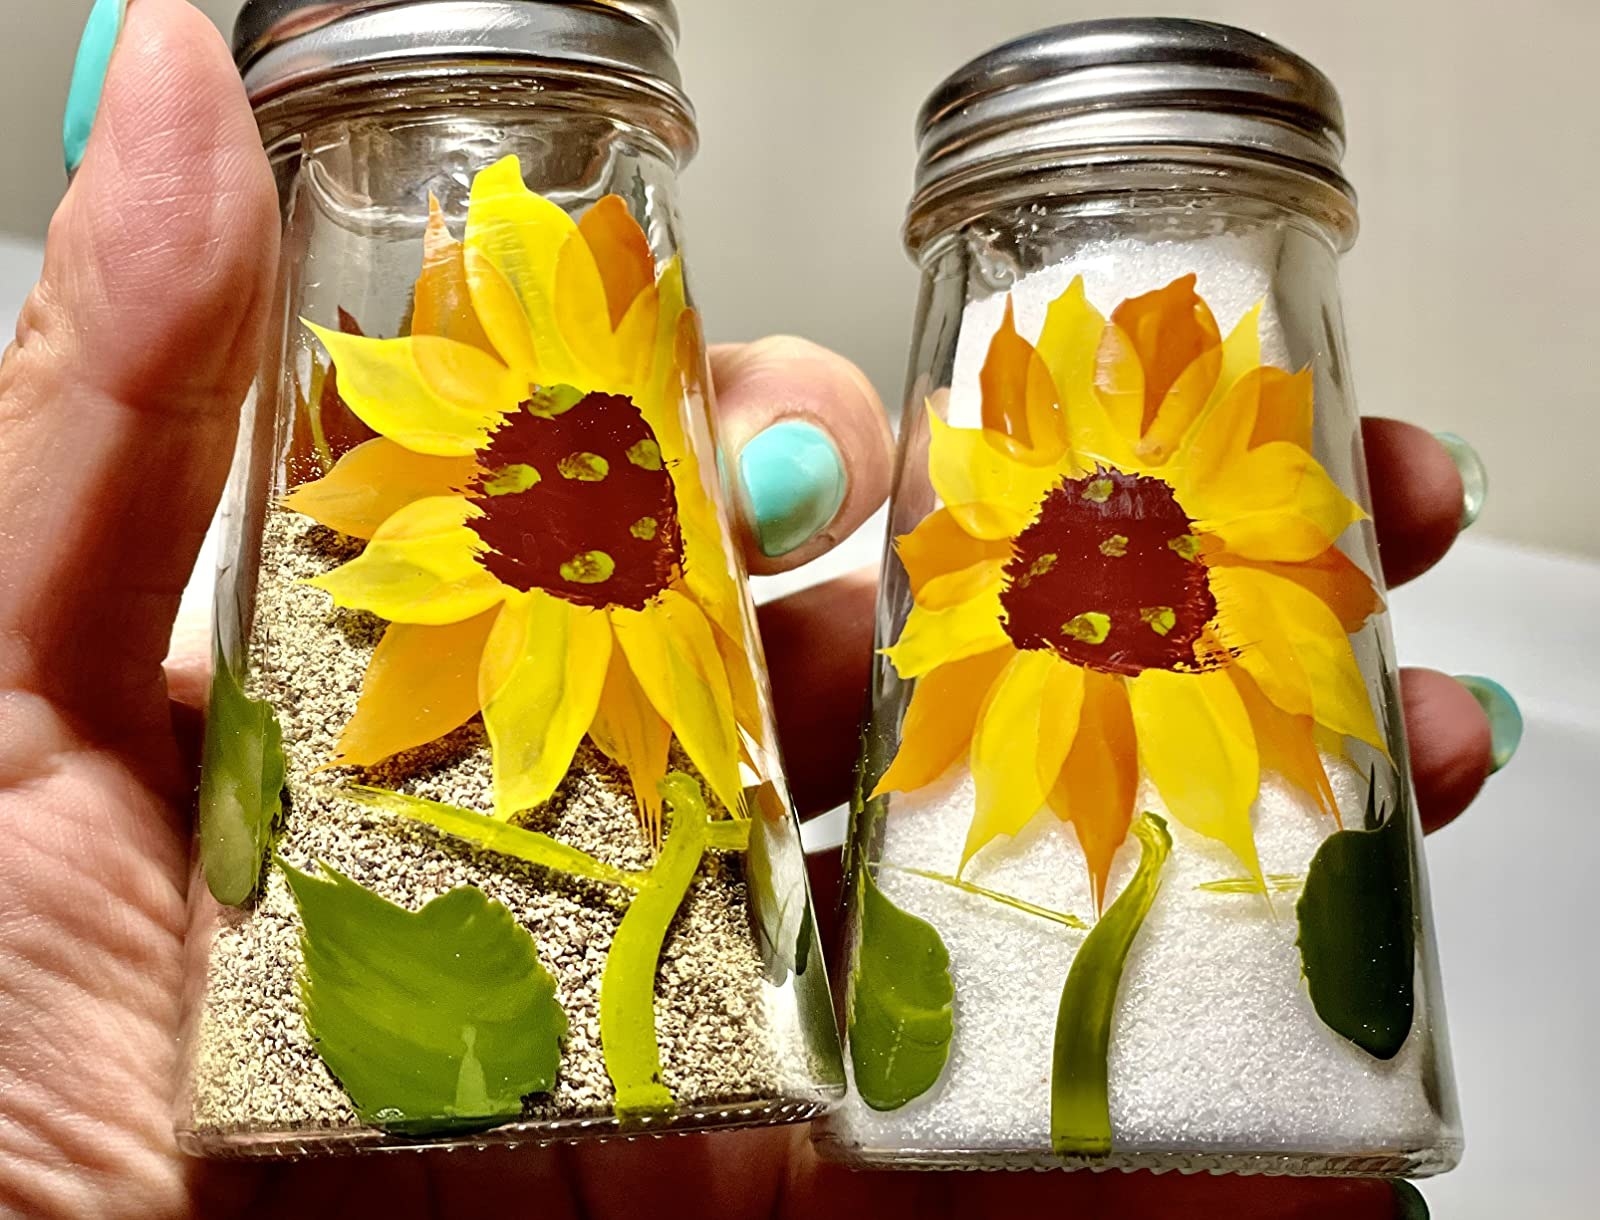 hands holding up the clear shakers with sunflowers painted on